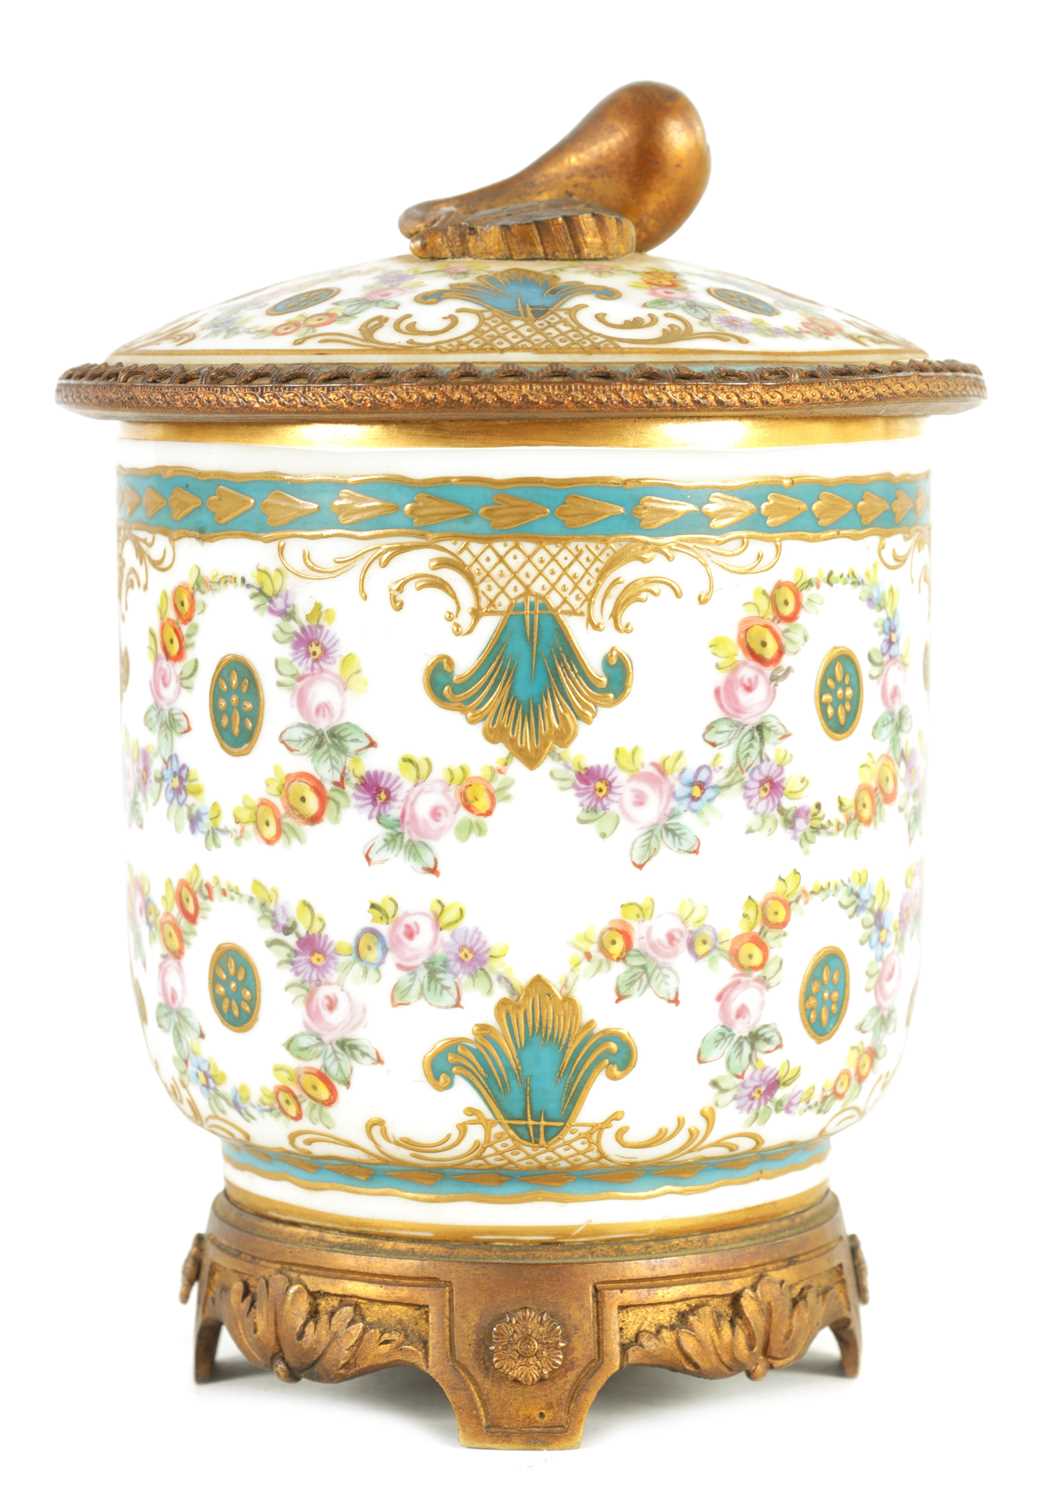 Lot 37 - A MID 18TH CENTURY ORMOLU MOUNTED SEVRES JAR AND COVER